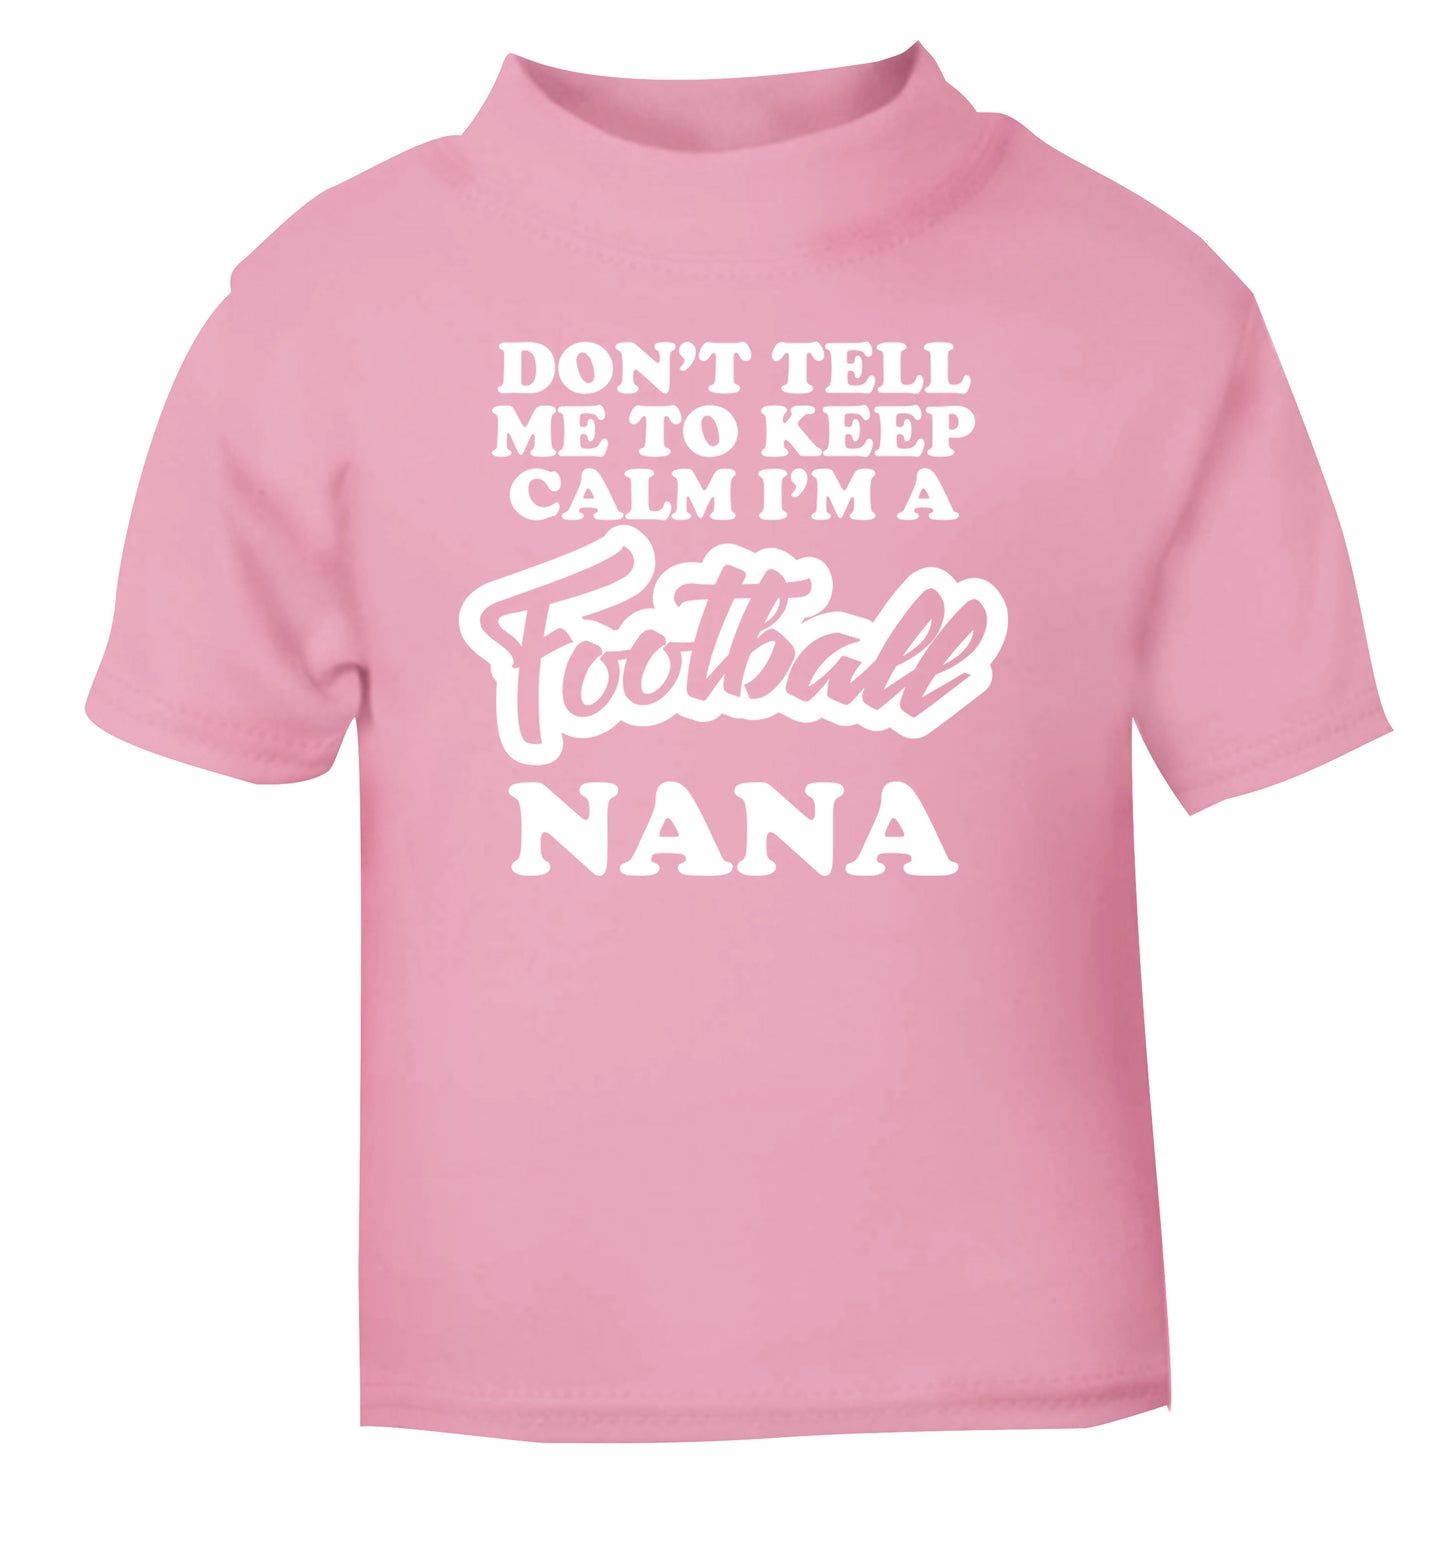 Don't tell me to keep calm I'm a football nana light pink Baby Toddler Tshirt 2 Years